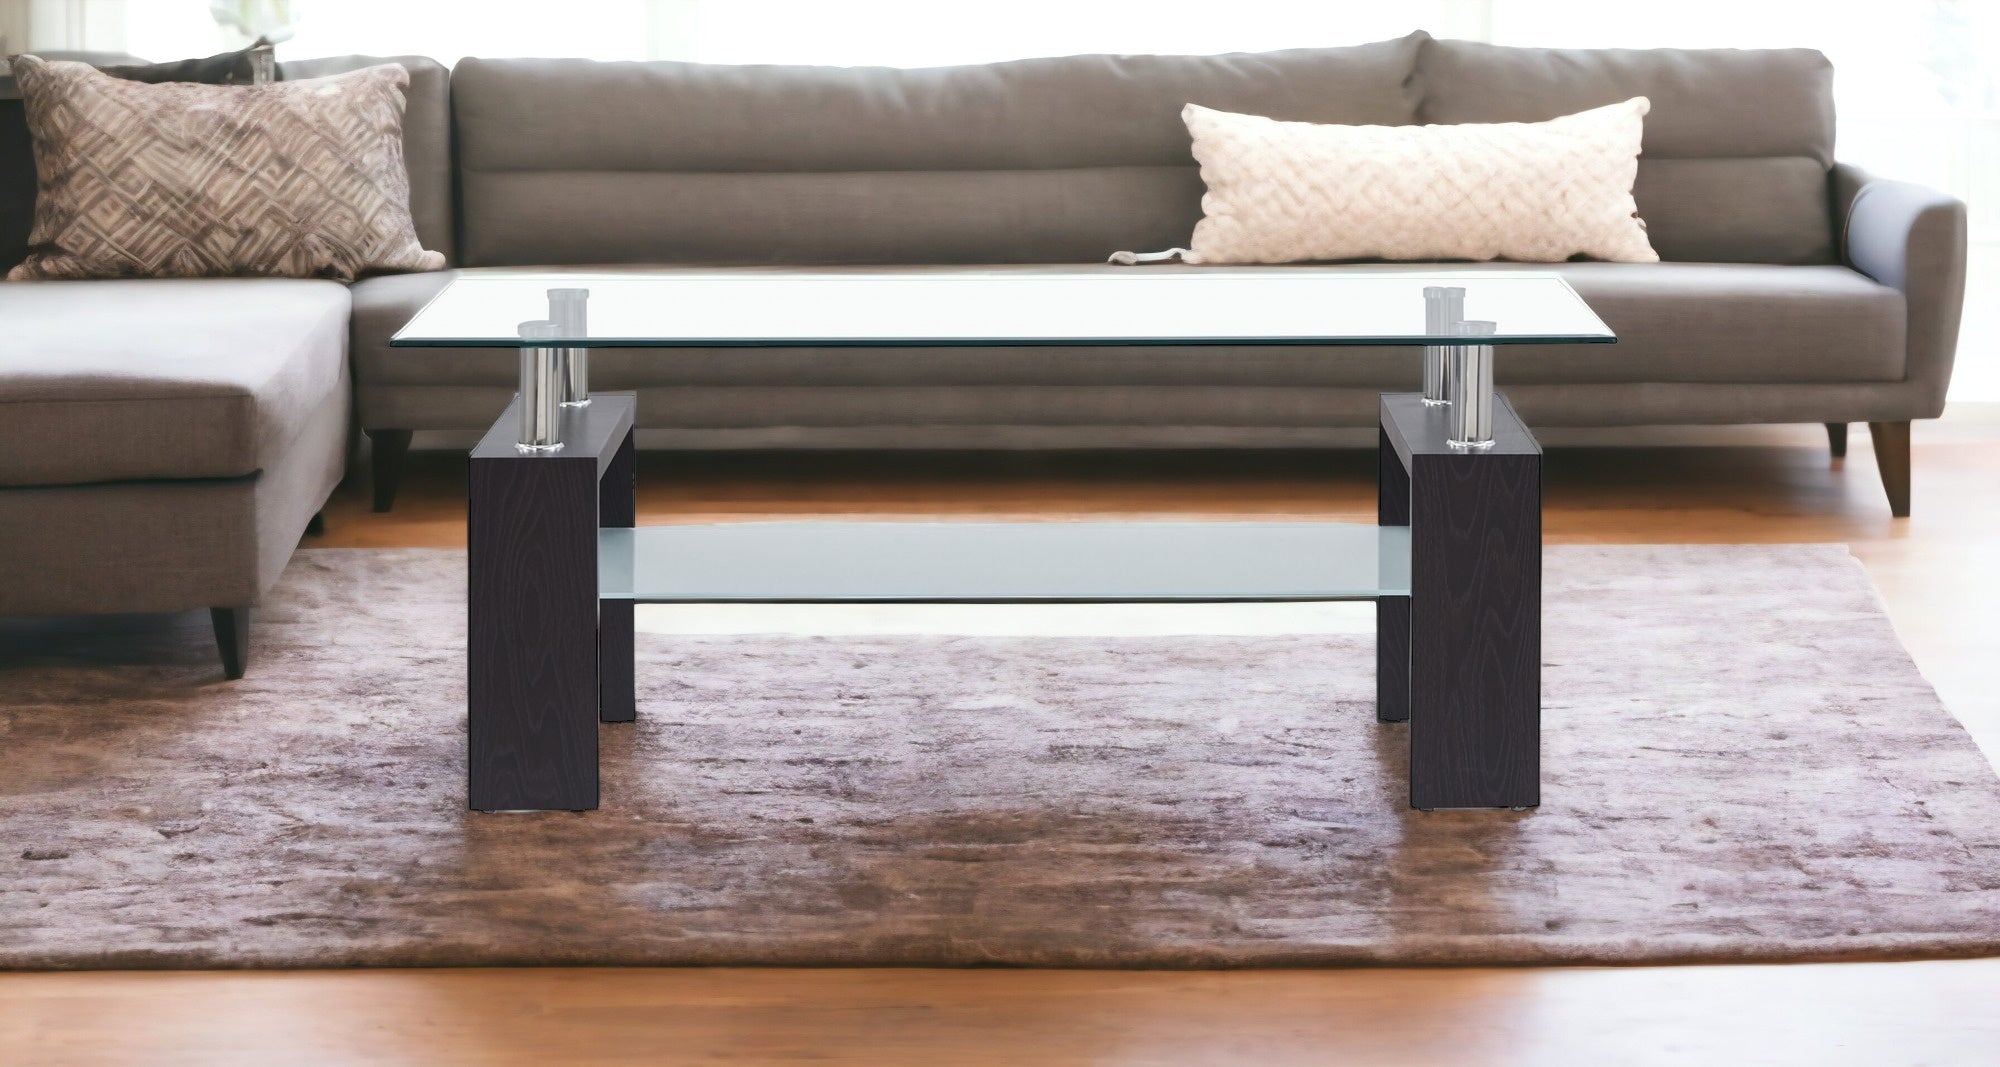 43" Clear And Dark Brown Glass Coffee Table With Shelf